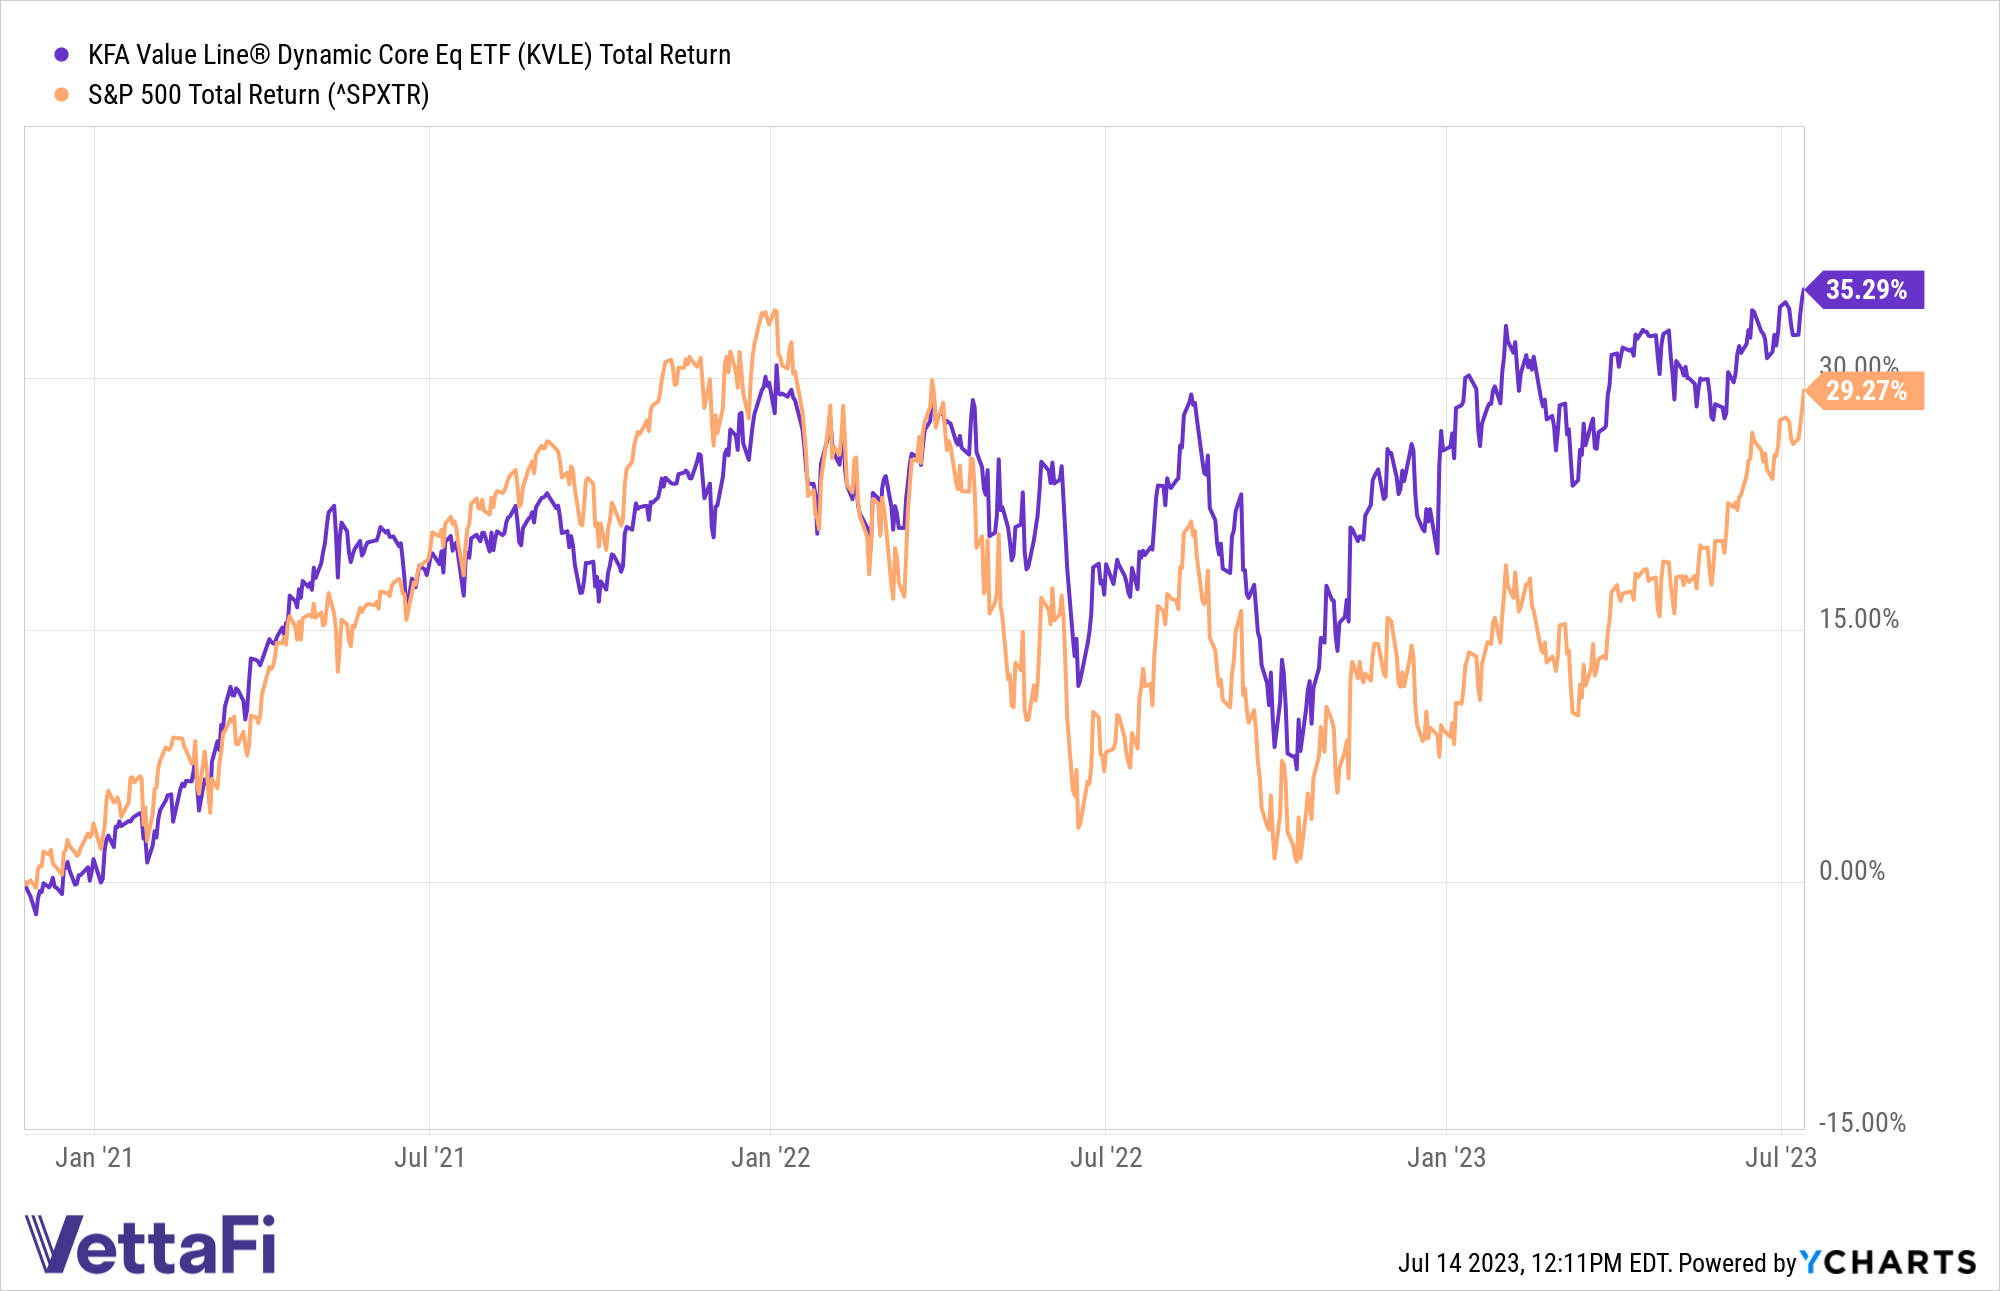 Chart of KVLE and SPY's total returns performance since November 24, 2020 to July 13, 2023.